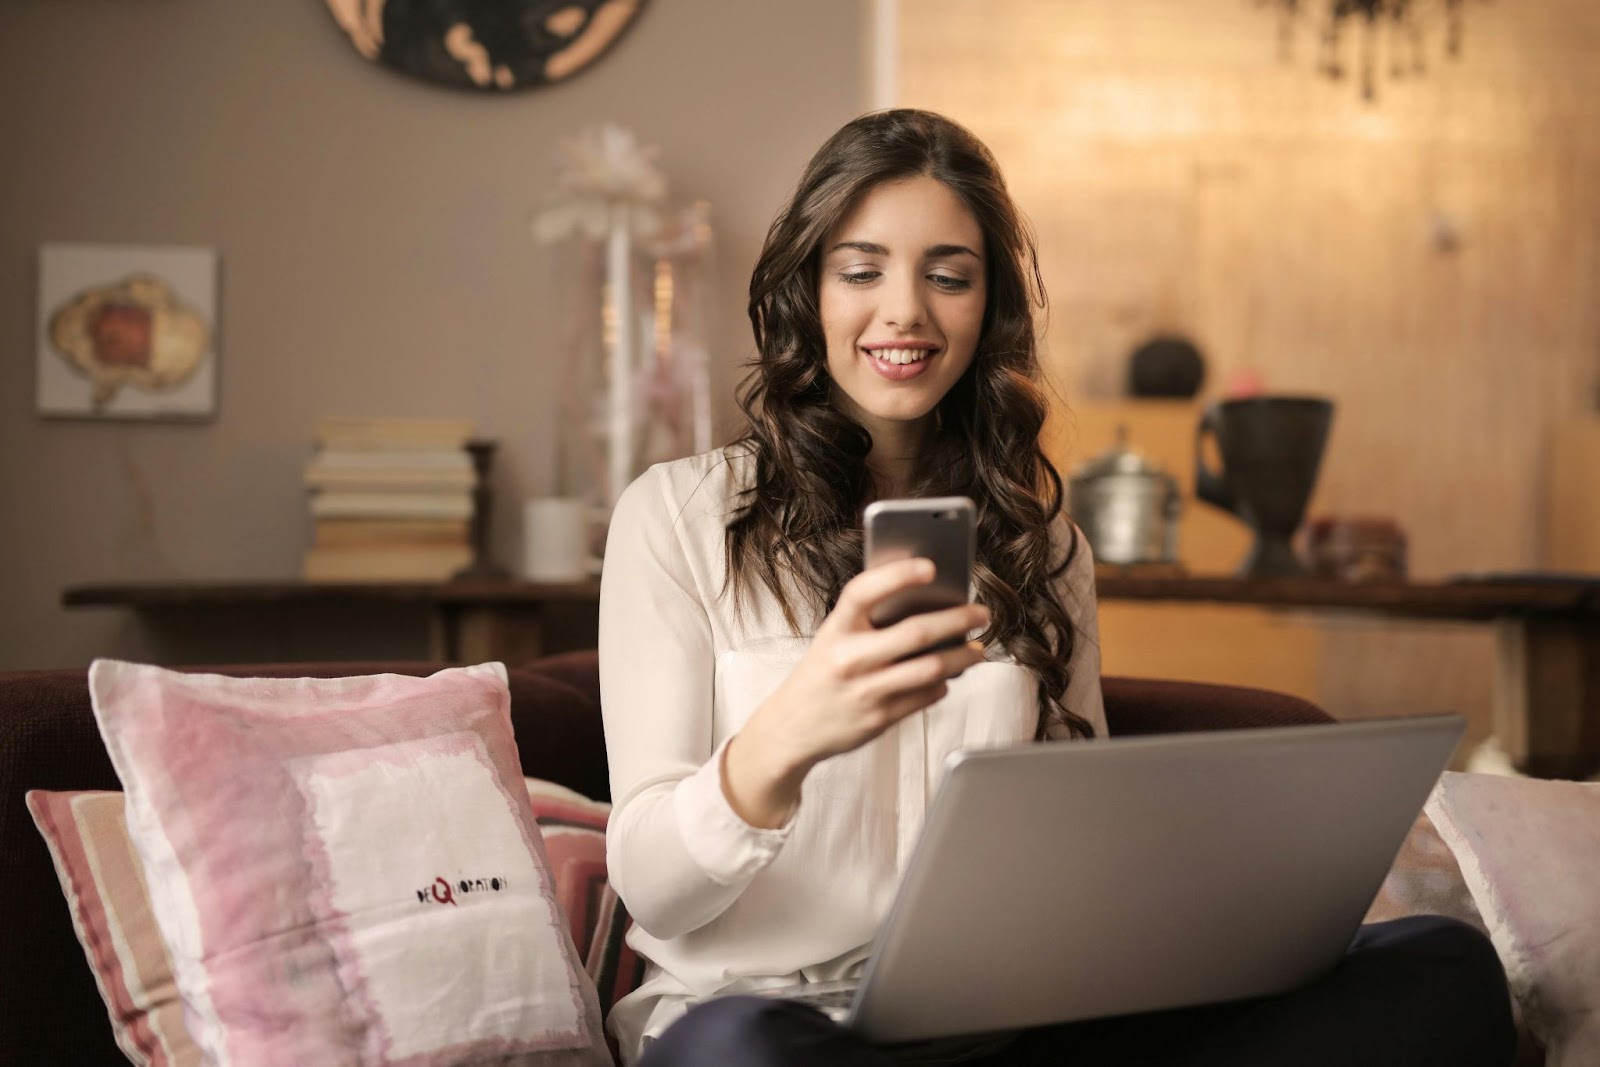 Woman smiling sitting on a couch with a phone and a laptop